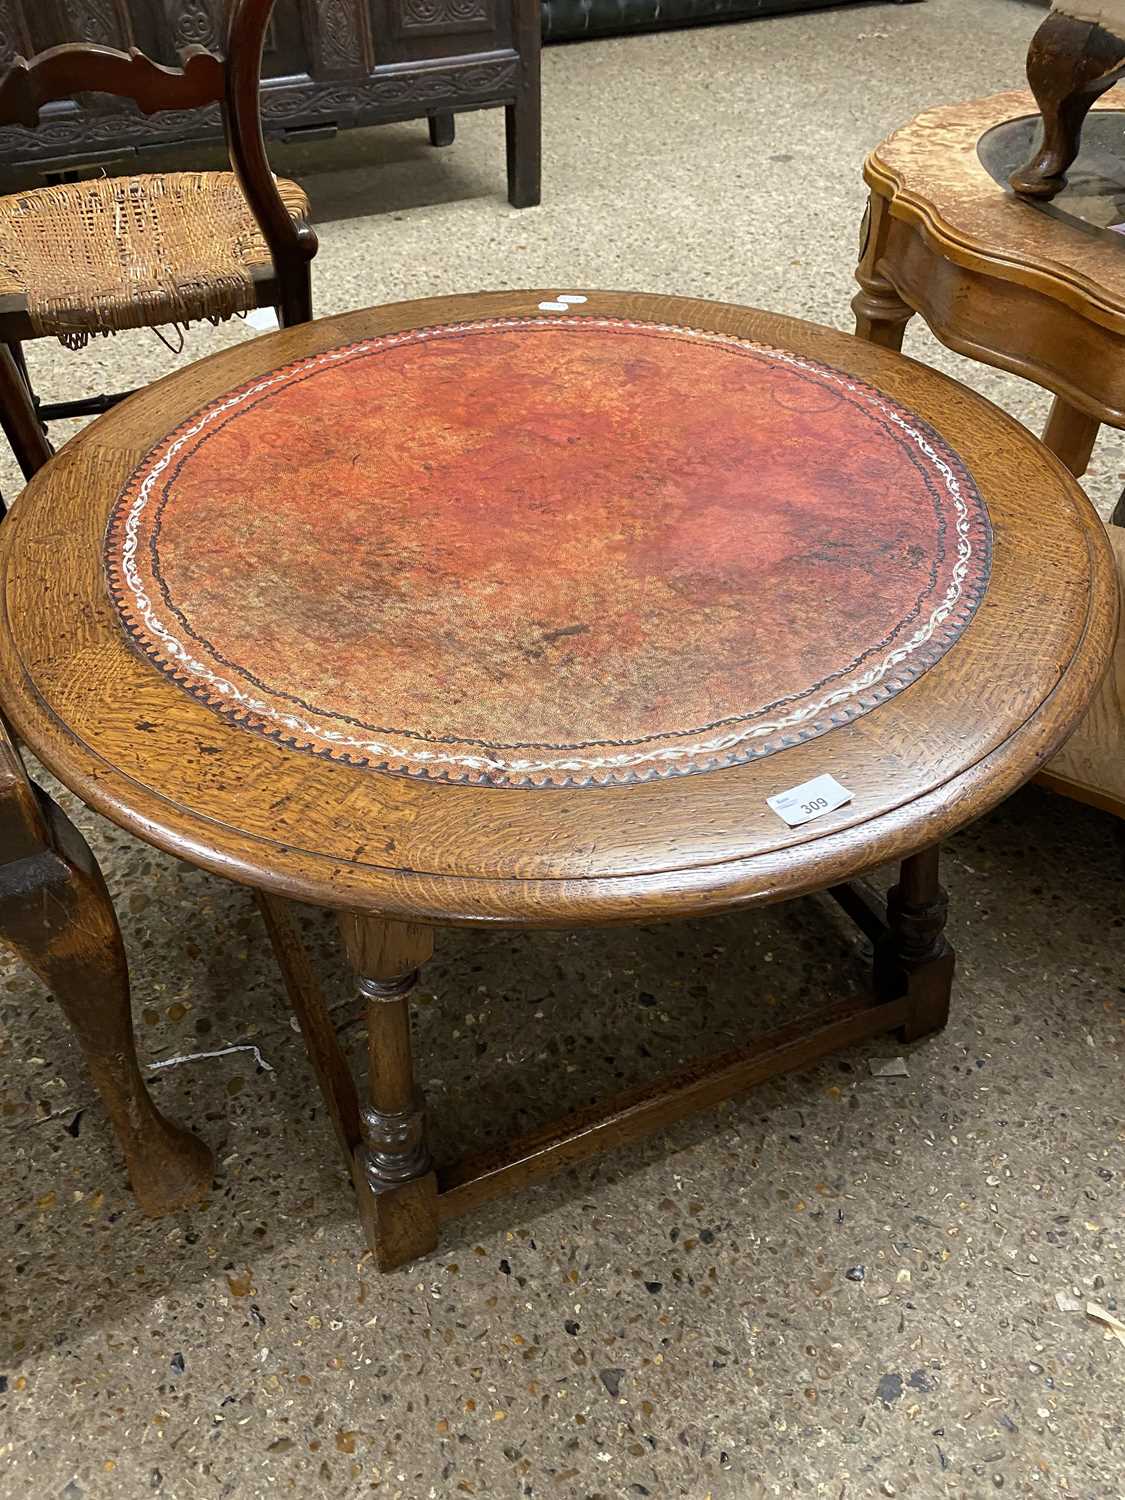 Circular oak topped coffee table with red leather insert